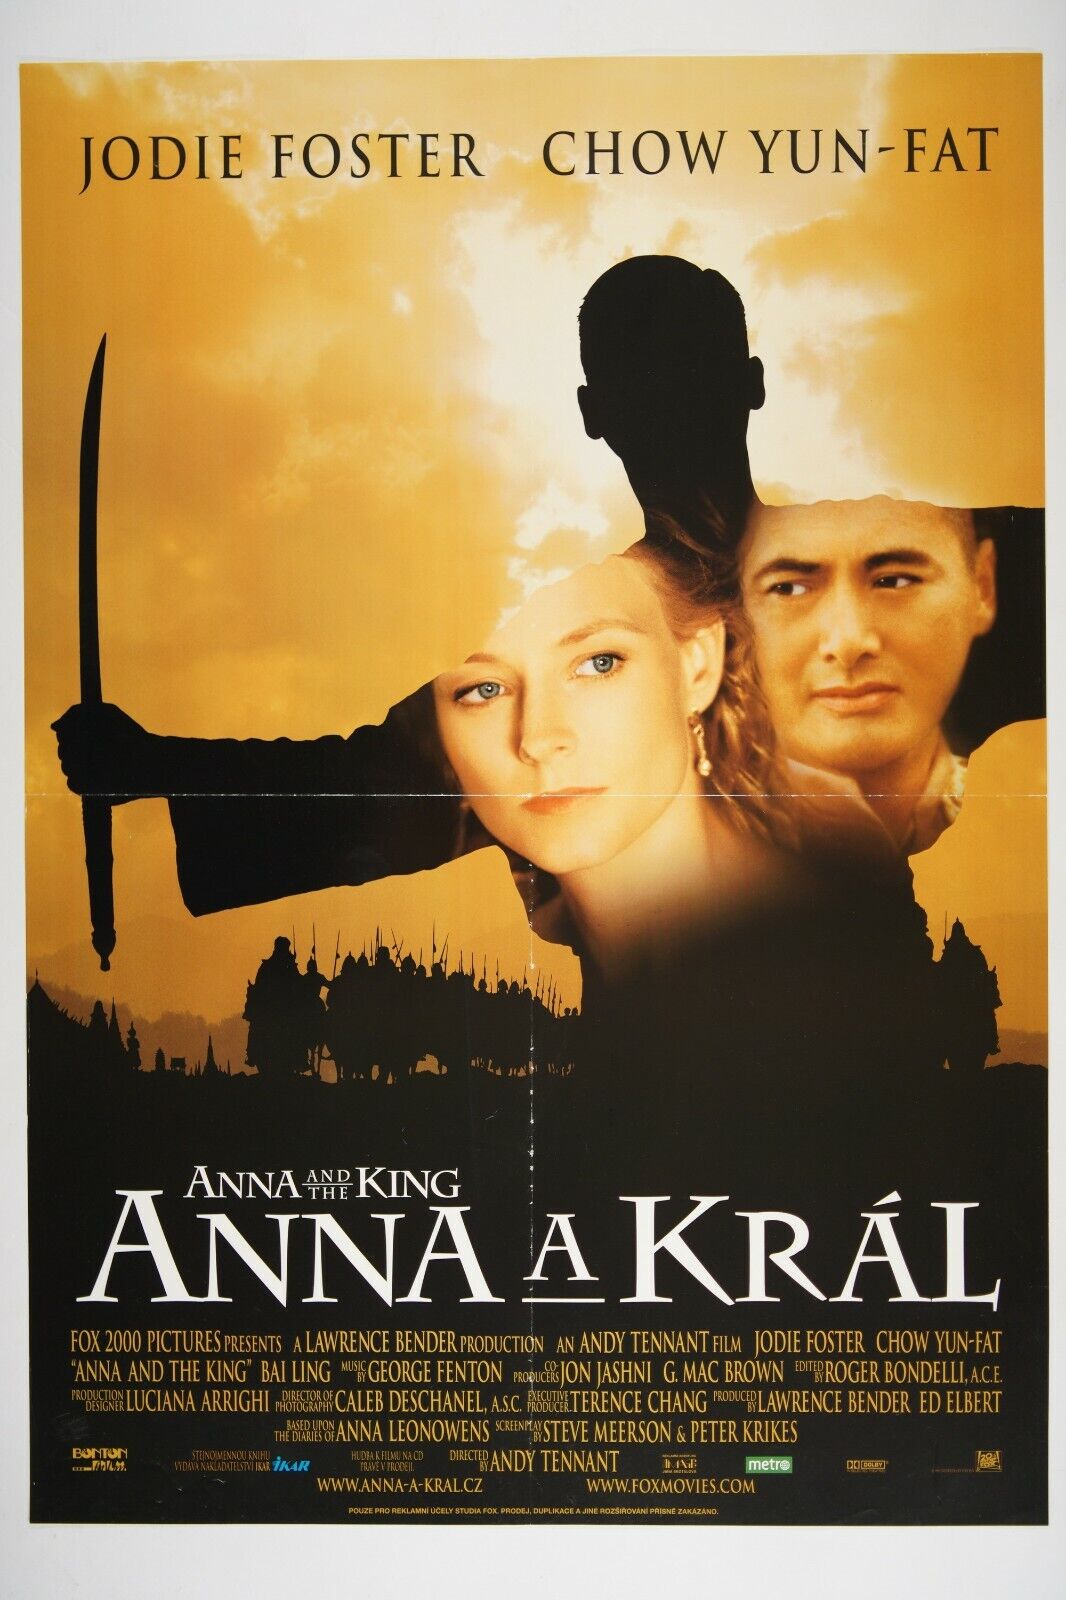 ANNA AND THE KING 23x33 Orig. Czech movie poster 1999 JODIE FOSTER, YUN-FAT CHOW